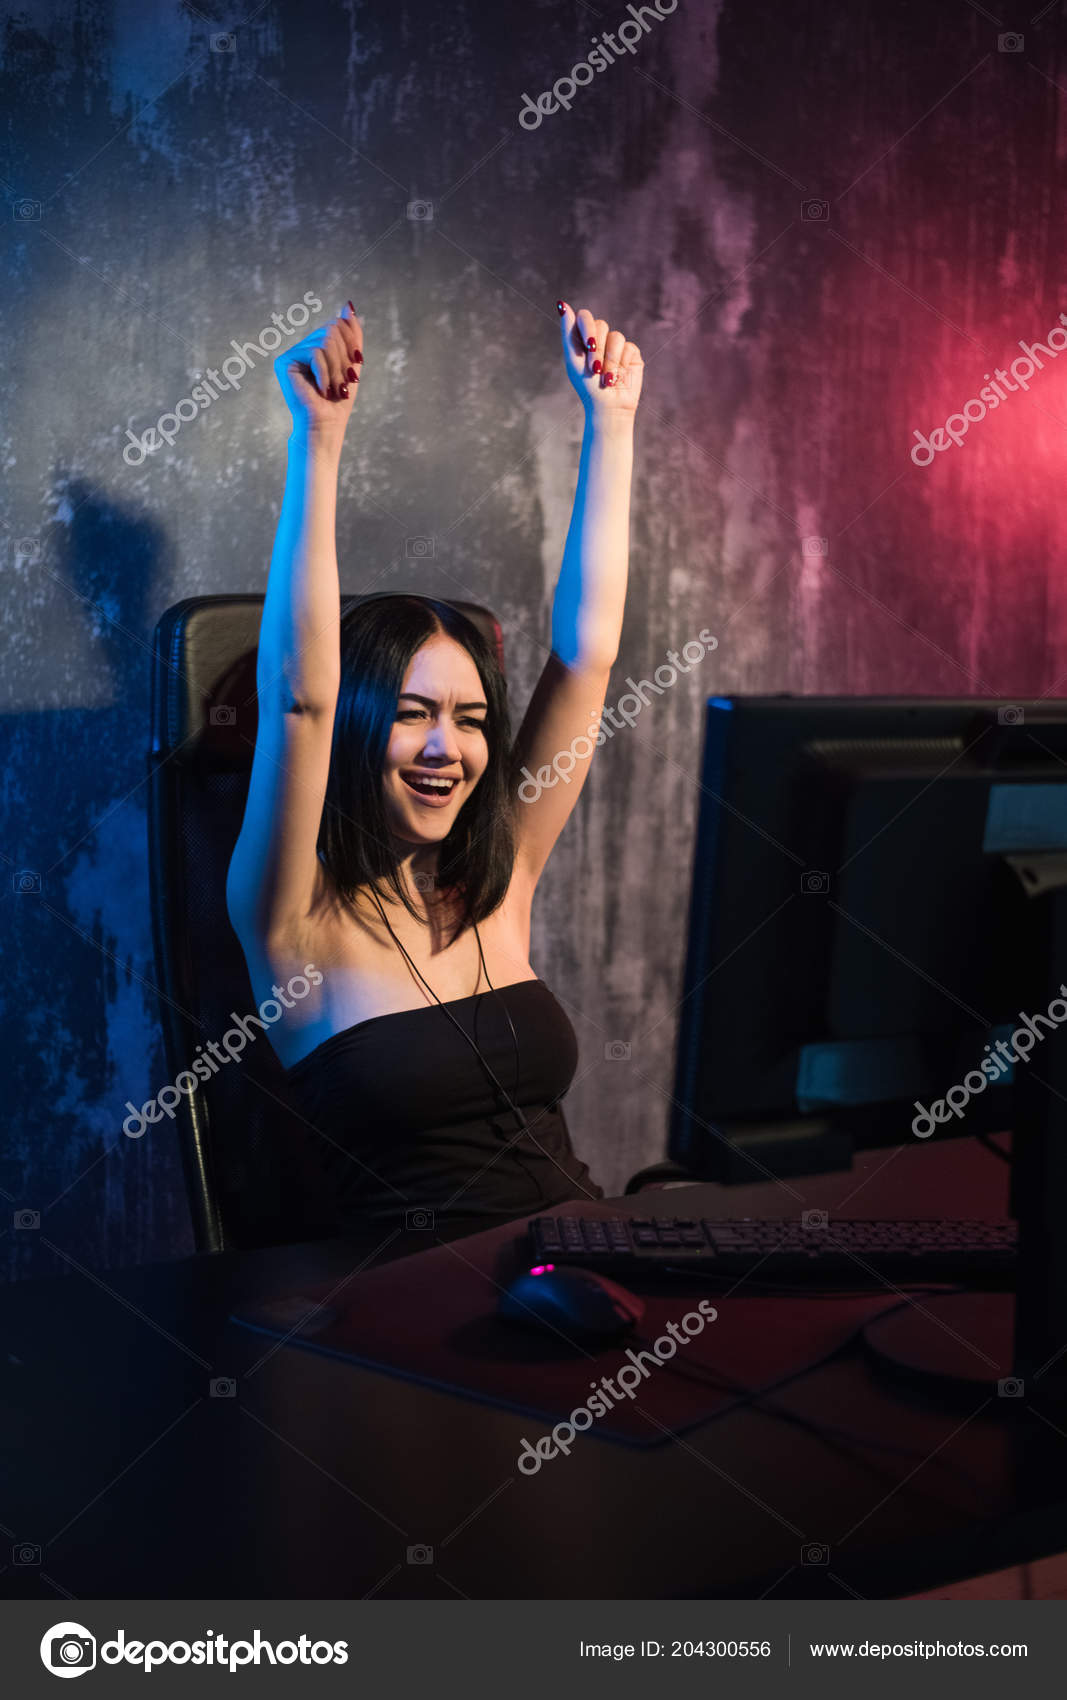 Girls sexy gamer Living with